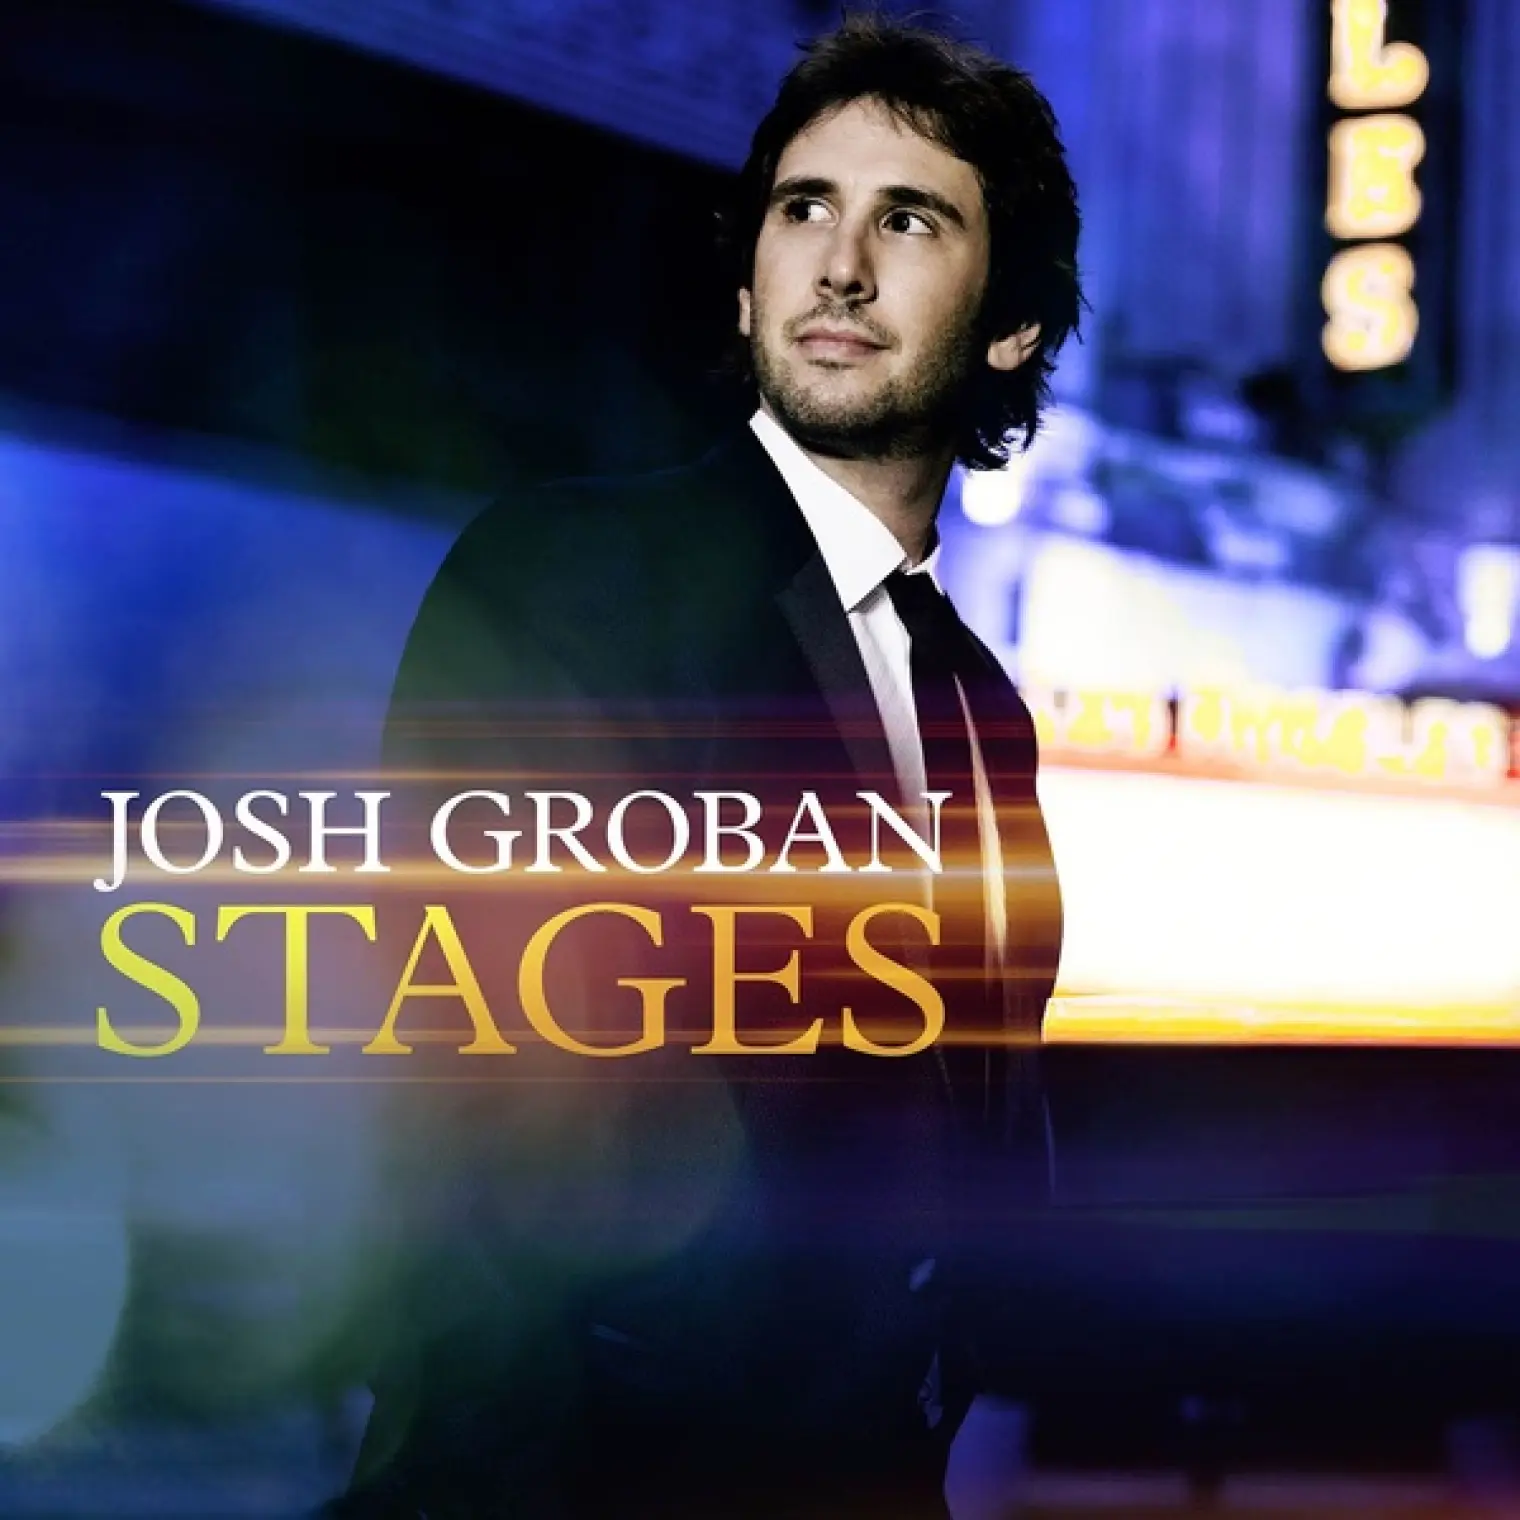 Stages (Deluxe) -  Josh Groban 